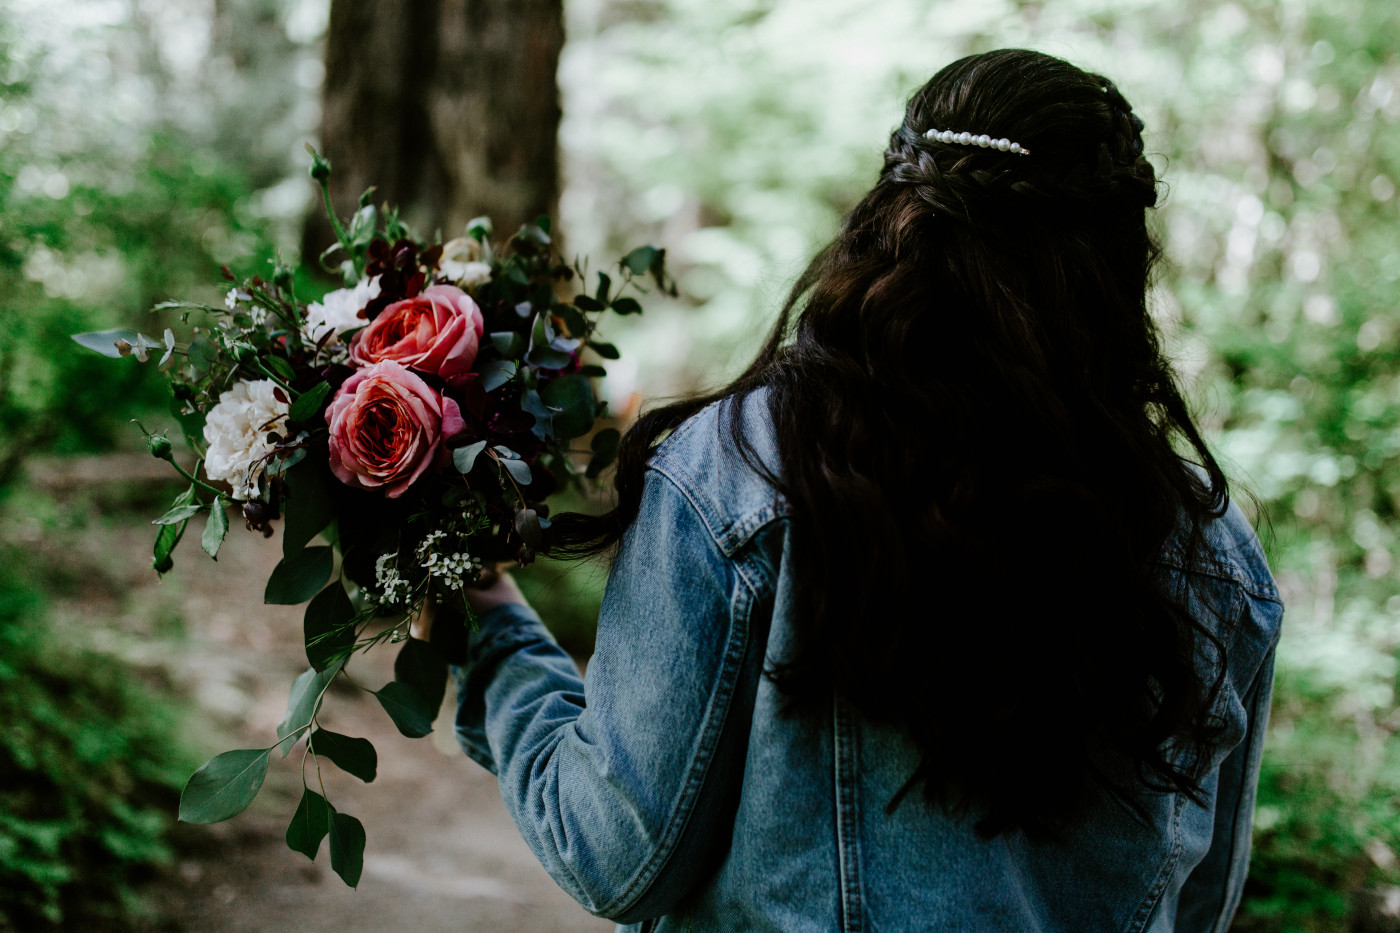 Brooke walks through the Hoh rainforest with her flowers. Elopement photography at Olympic National Park by Sienna Plus Josh.